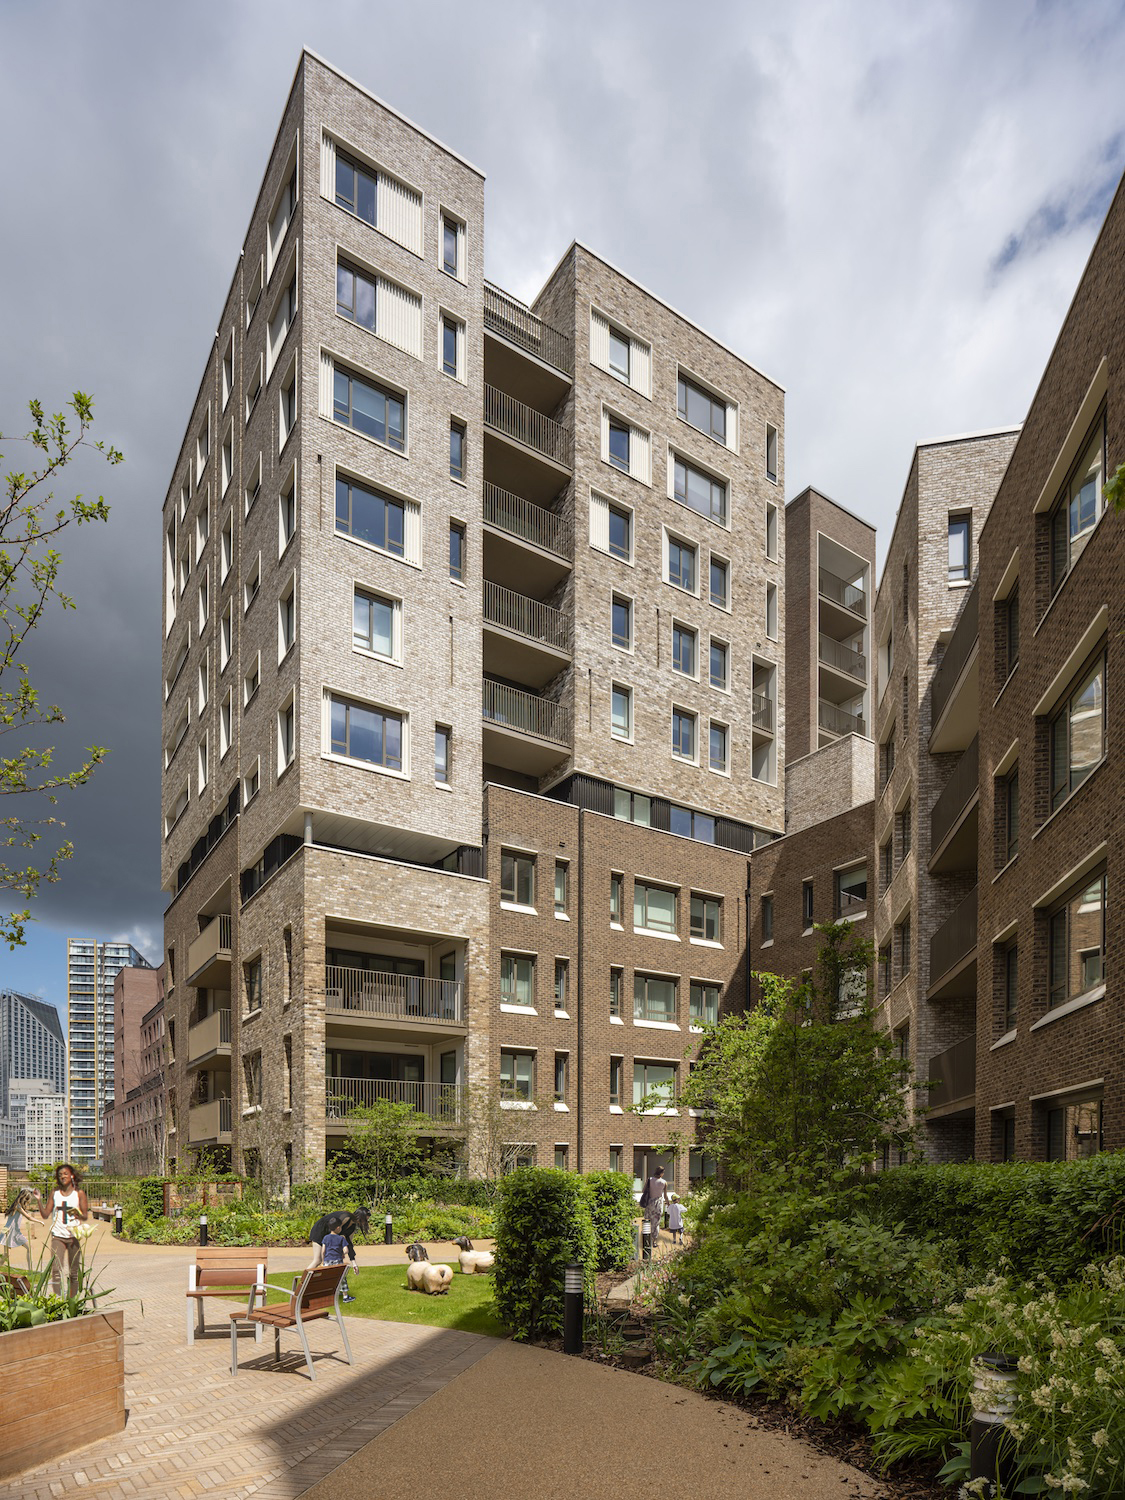 Orchard Gardens, Elephant and Castle